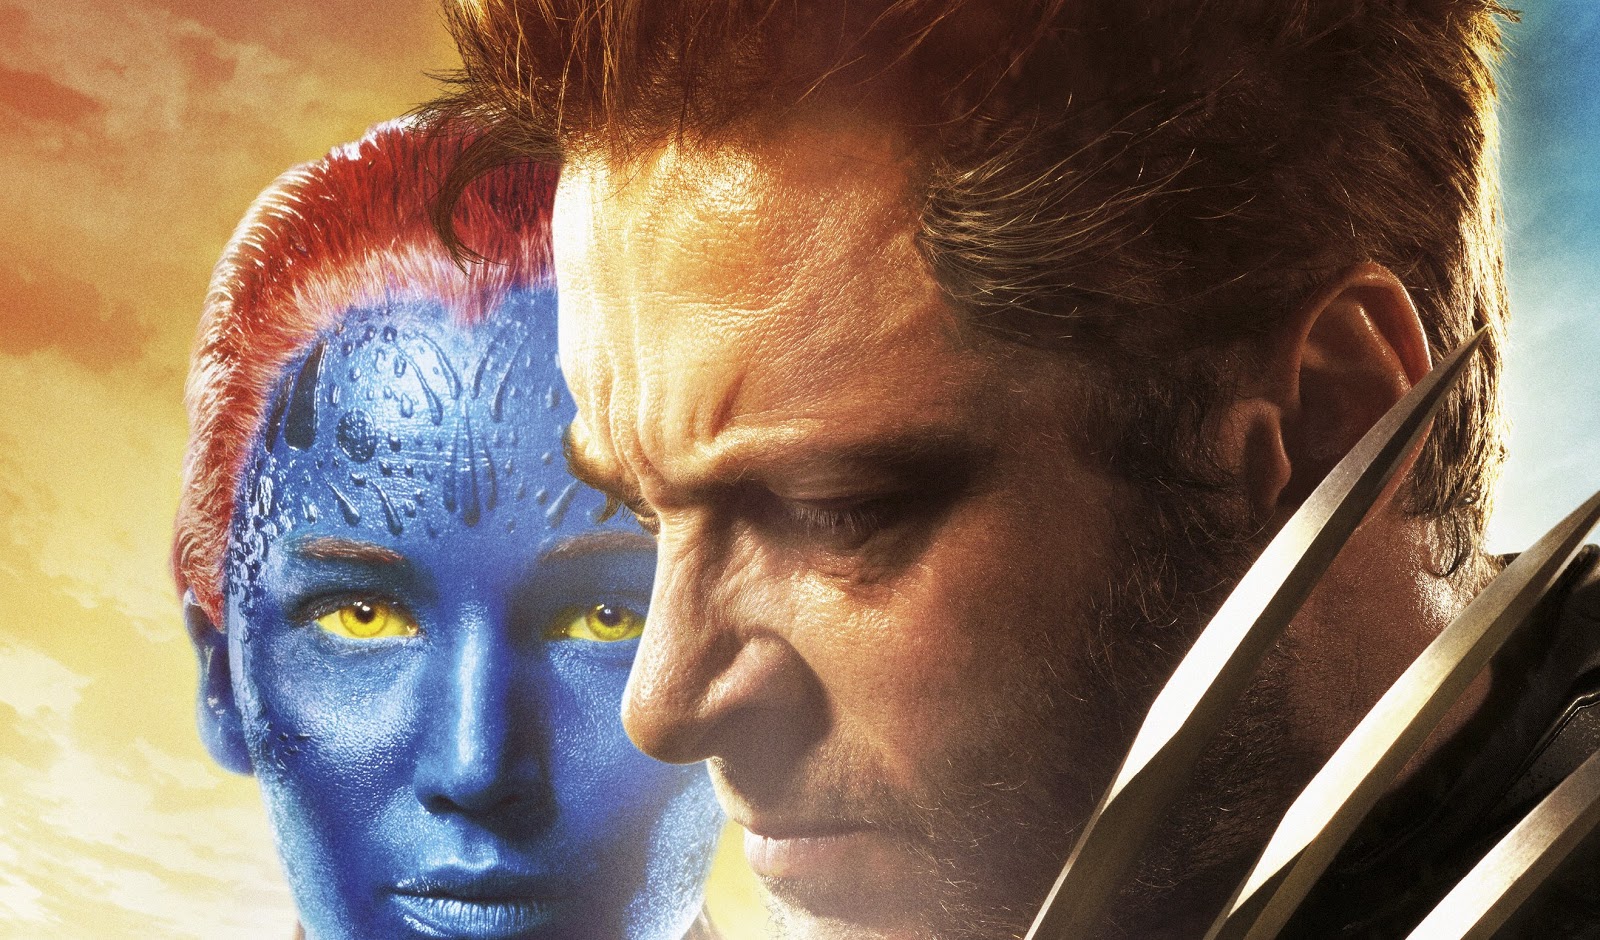 MOVIES: X-Men: Days of Future Past - 4 New Character Posters